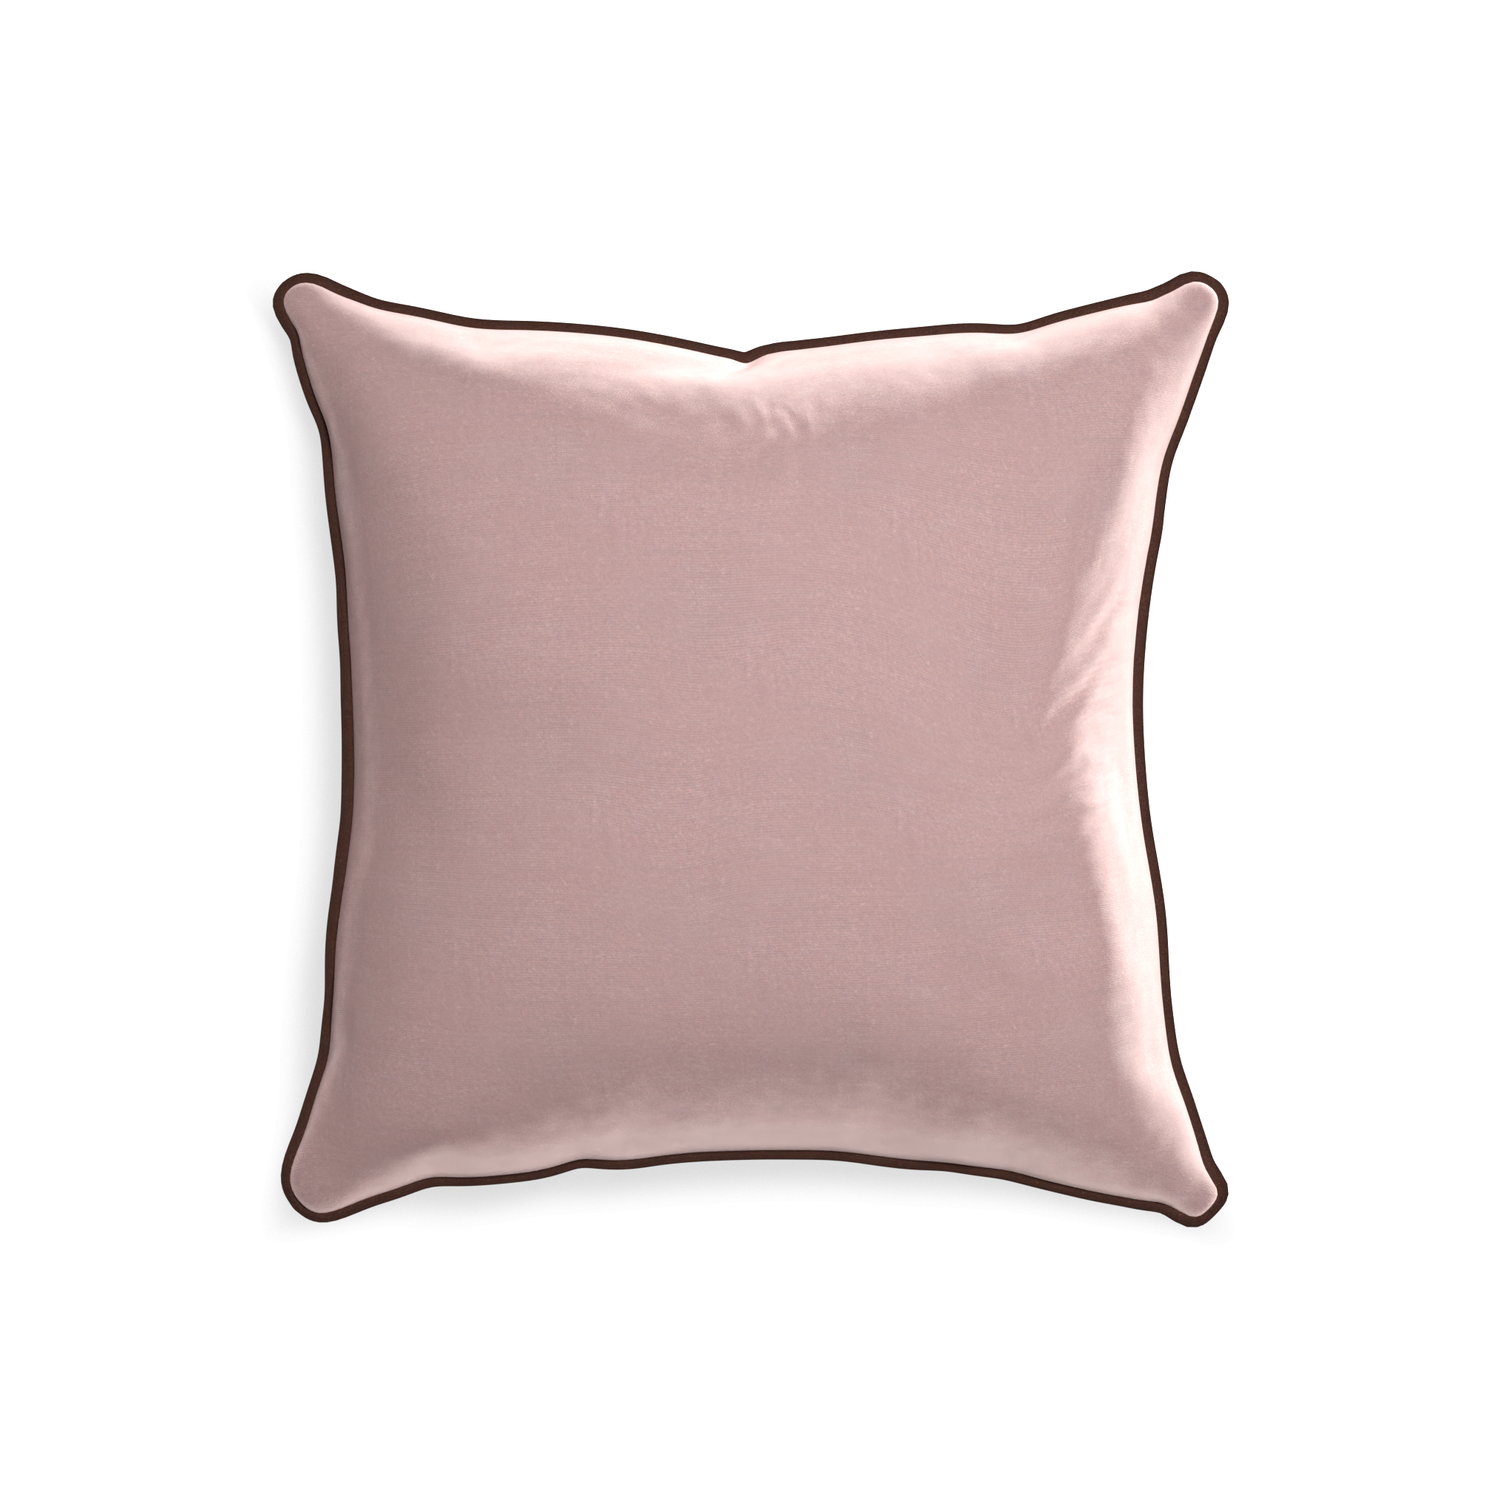 square mauve velvet pillow with brown piping